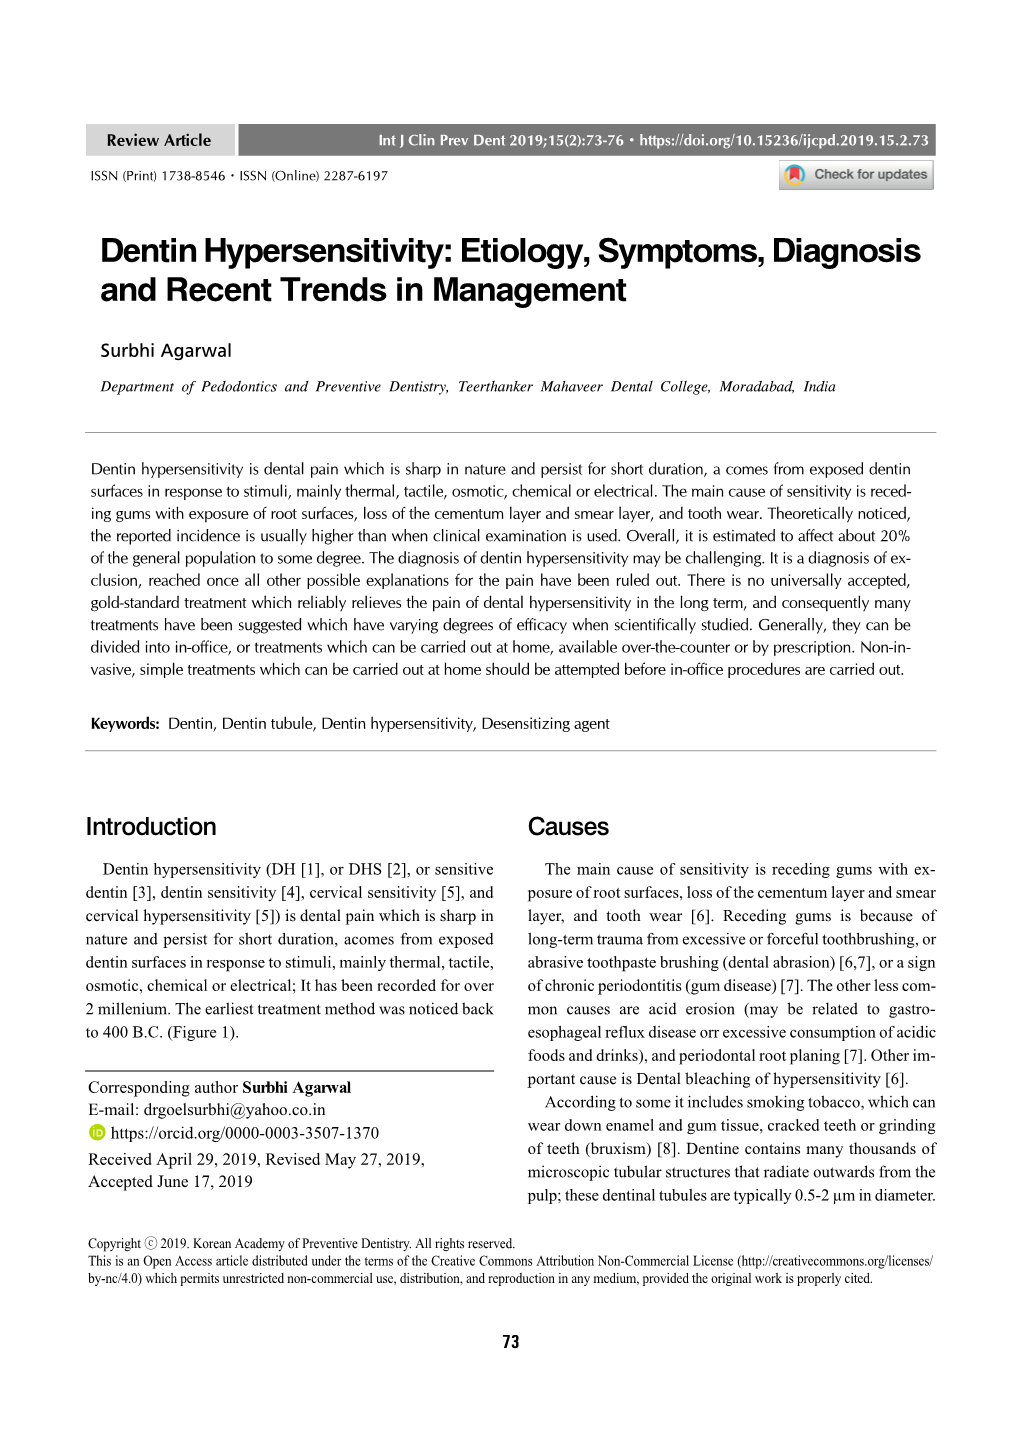 Dentin Hypersensitivity: Etiology, Symptoms, Diagnosis and Recent Trends in Management